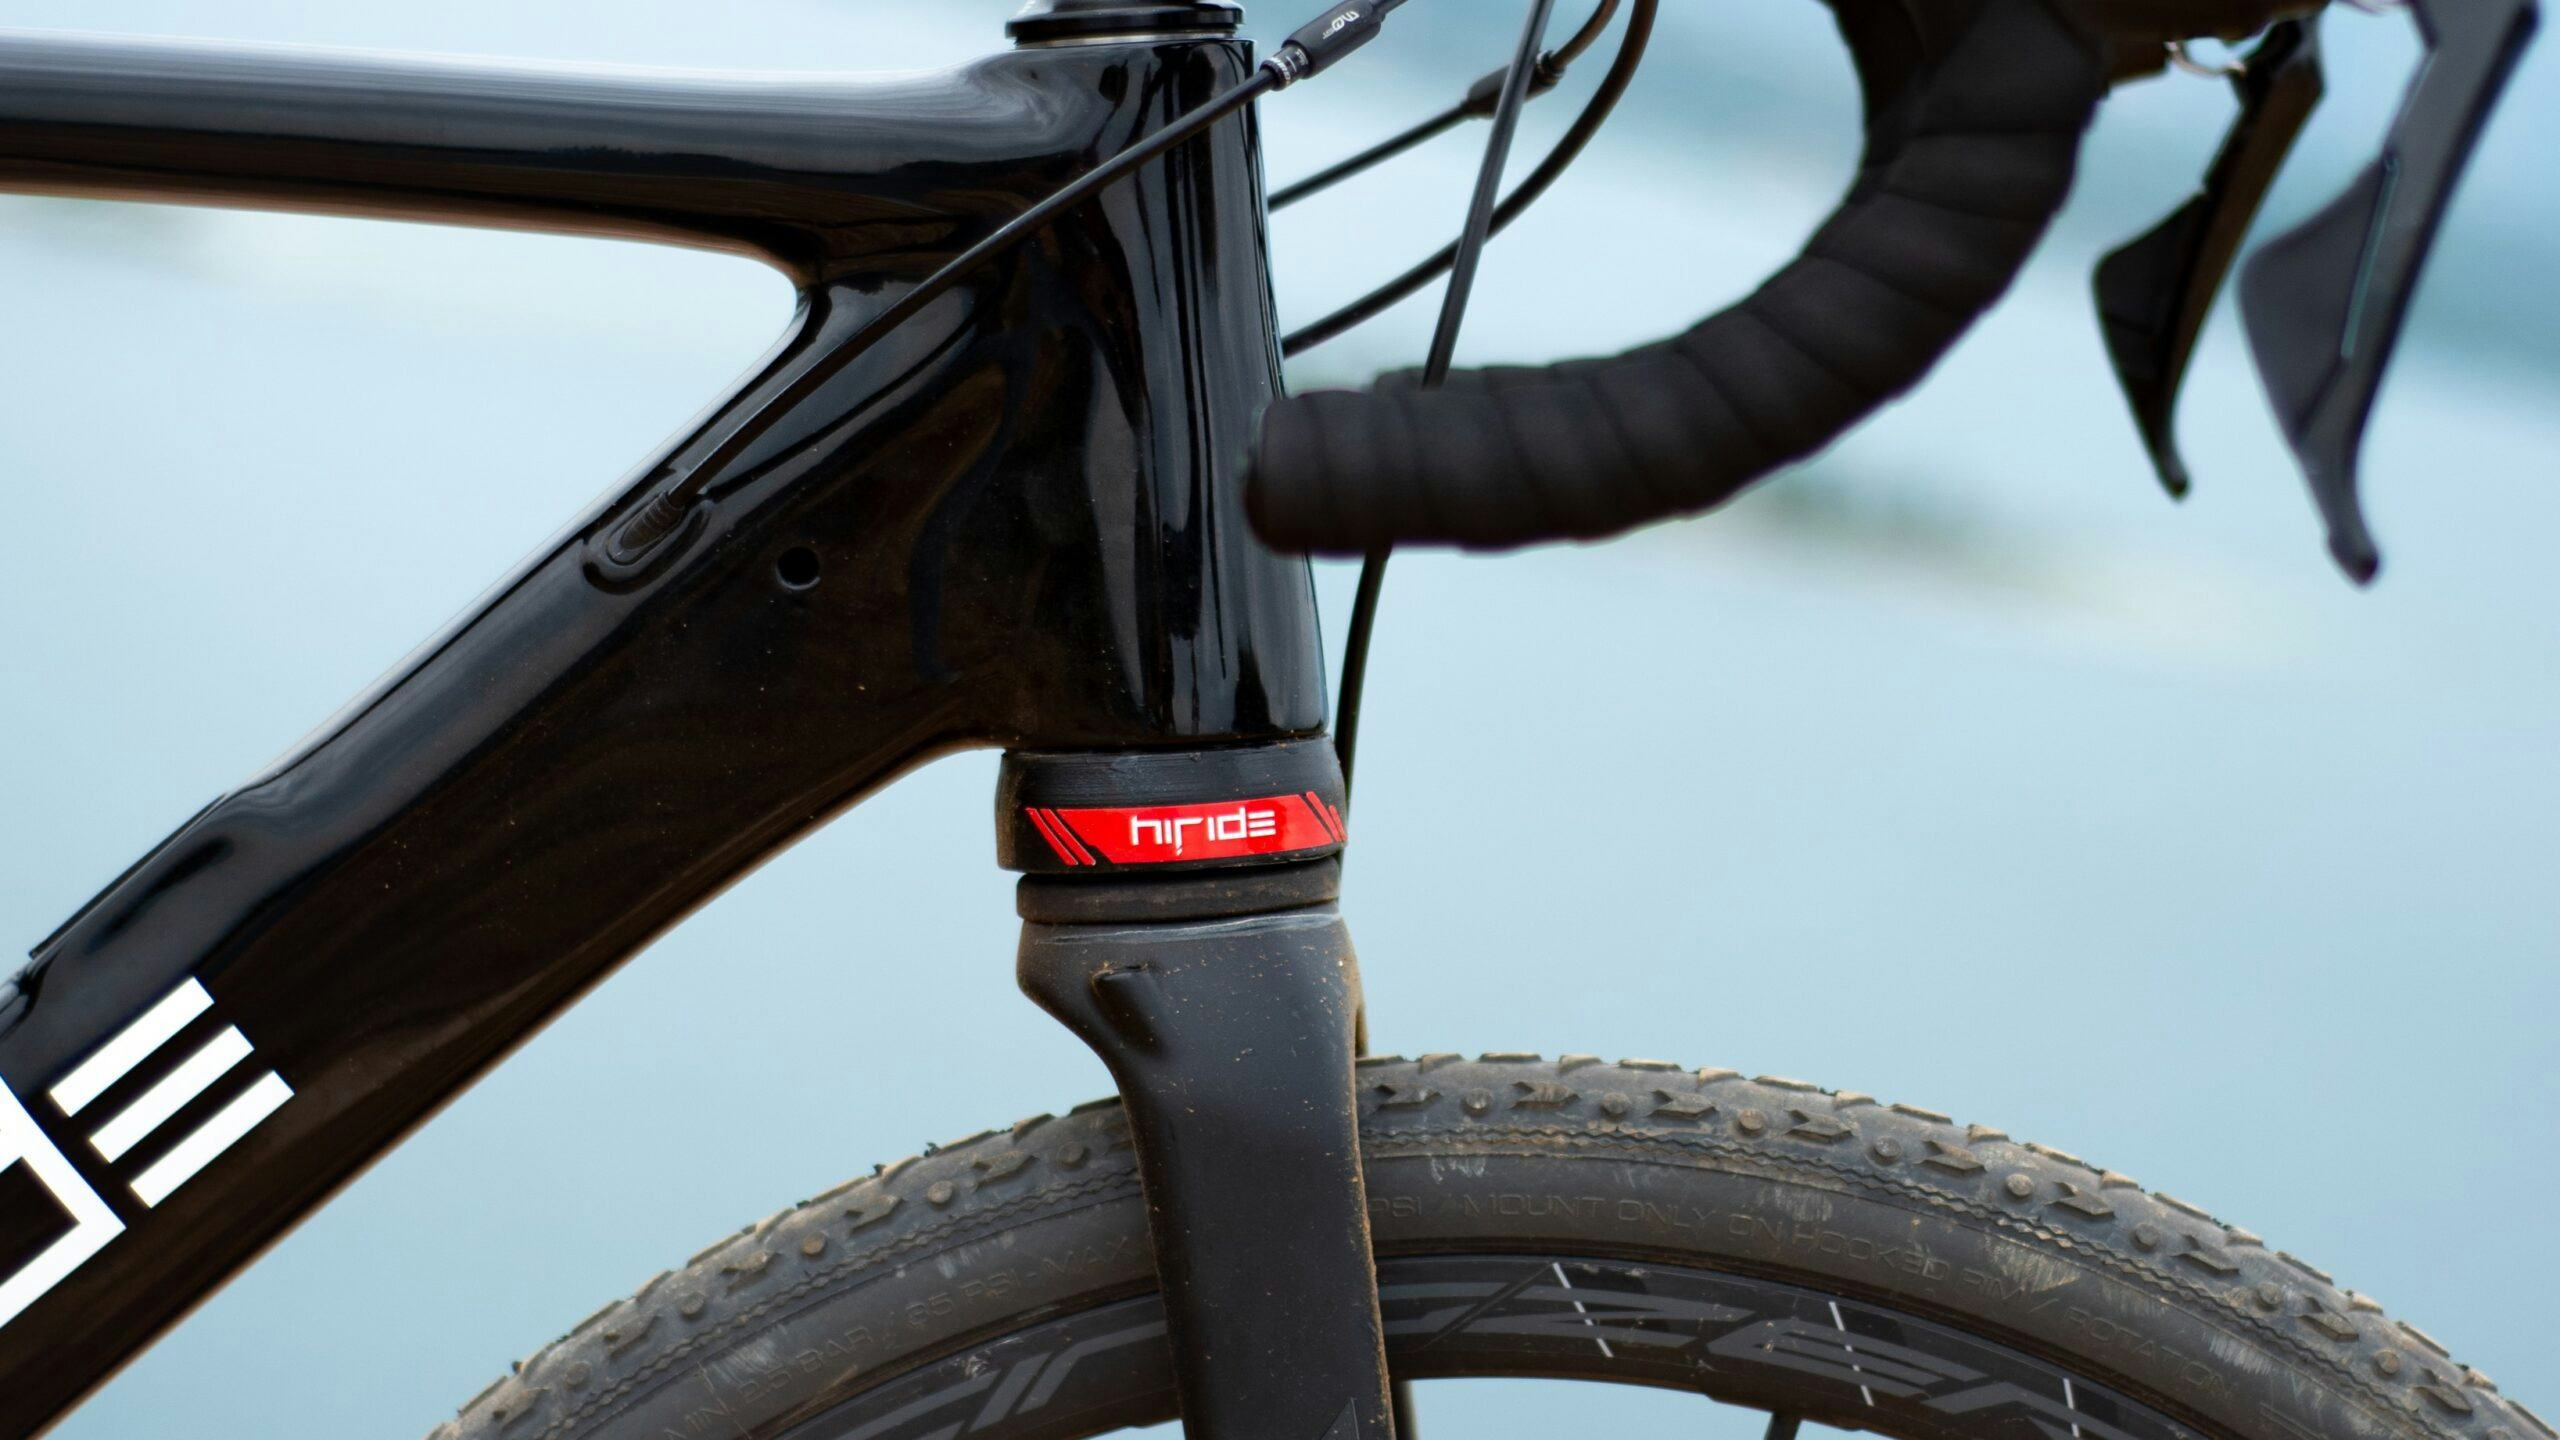 The All-Road integrated Adaptive Suspension developed by Italian HiRide. – Photo Bike Europe 